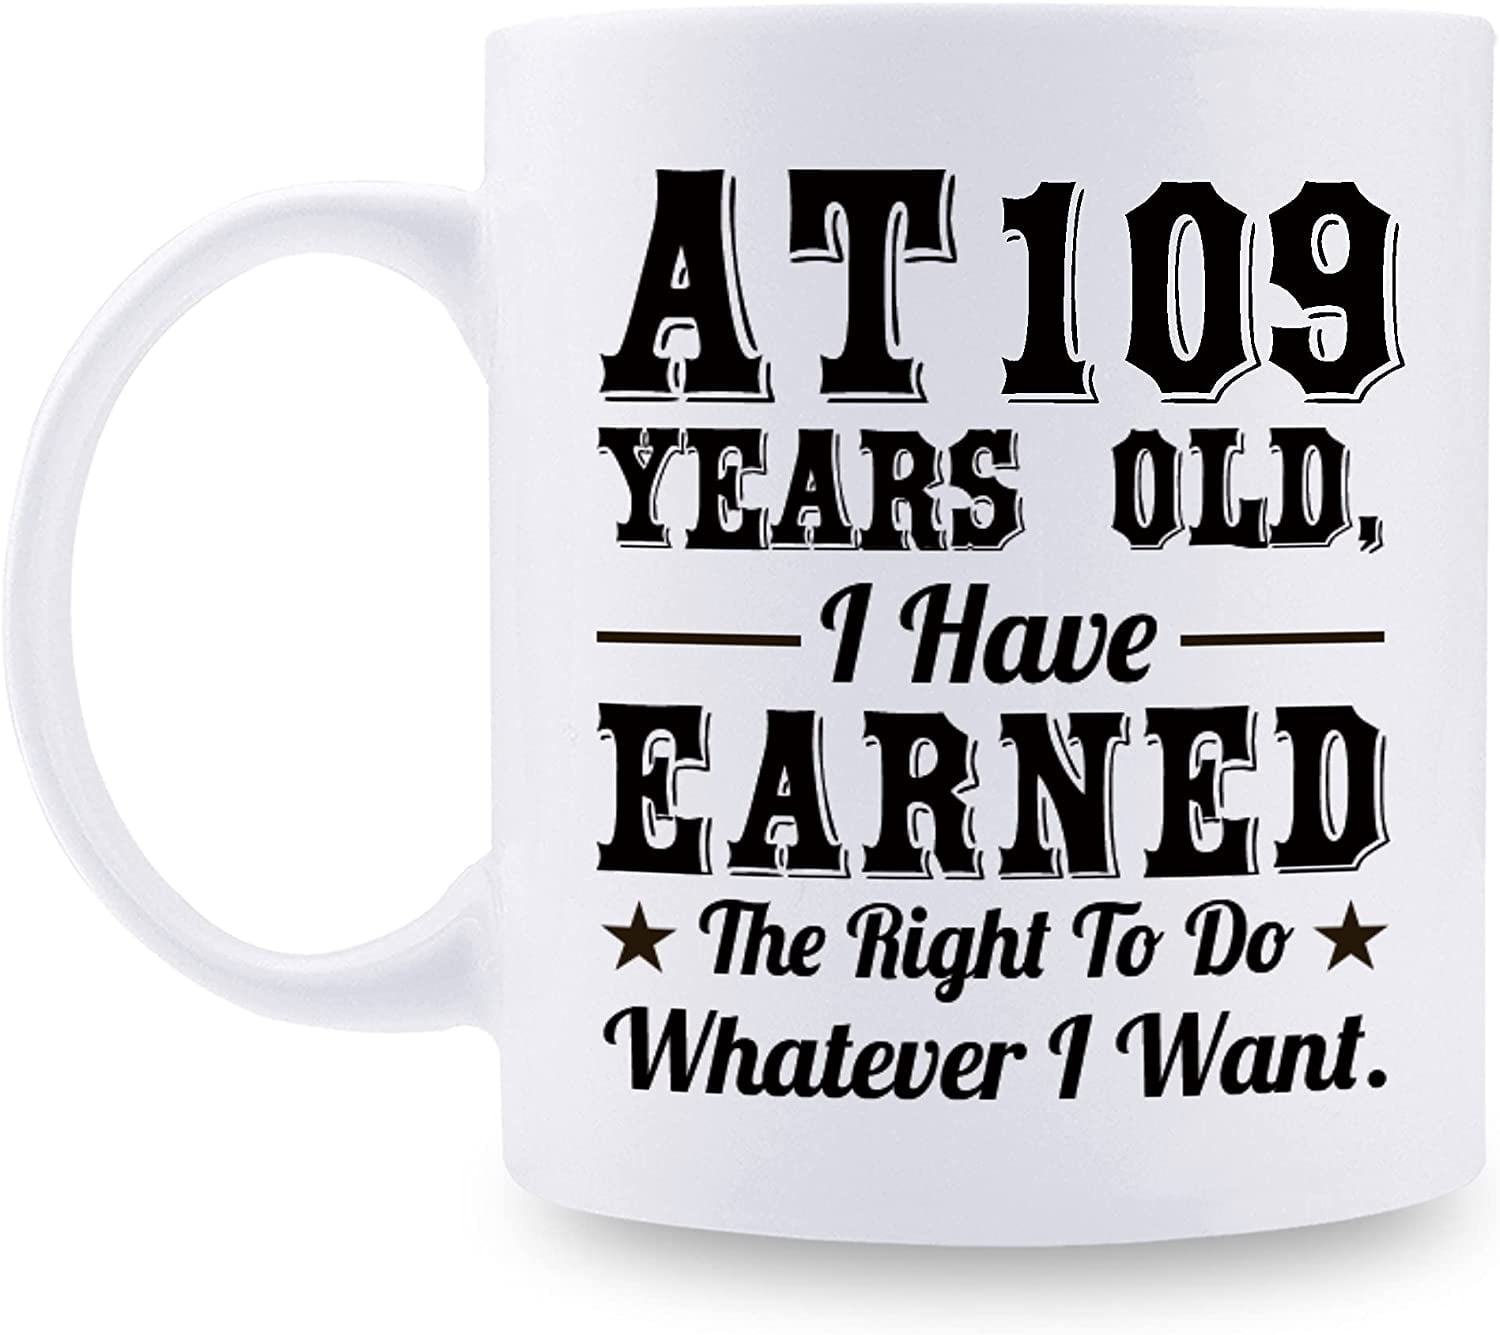 Making America Great Since 1963 Personalized Coffee Tumbler for Men or  Women, Funny 60th Birthday Mug Gift for Husband, Dad. Father in Law 